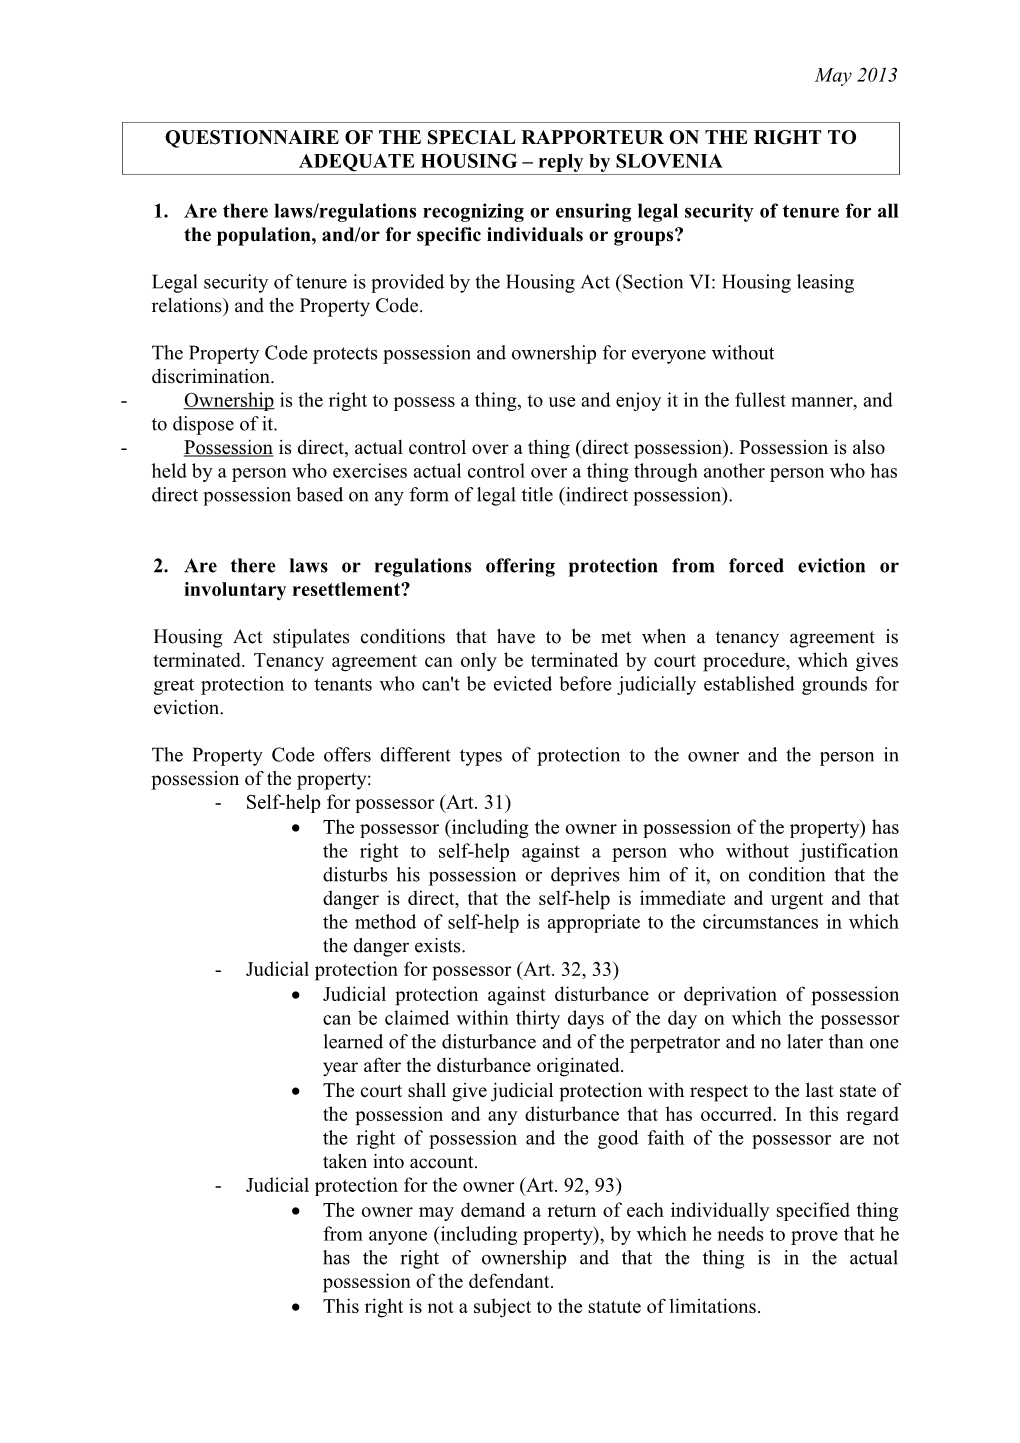 QUESTIONNAIRE of the SPECIAL RAPPORTEUR on the RIGHT to ADEQUATE HOUSING Reply by SLOVENIA